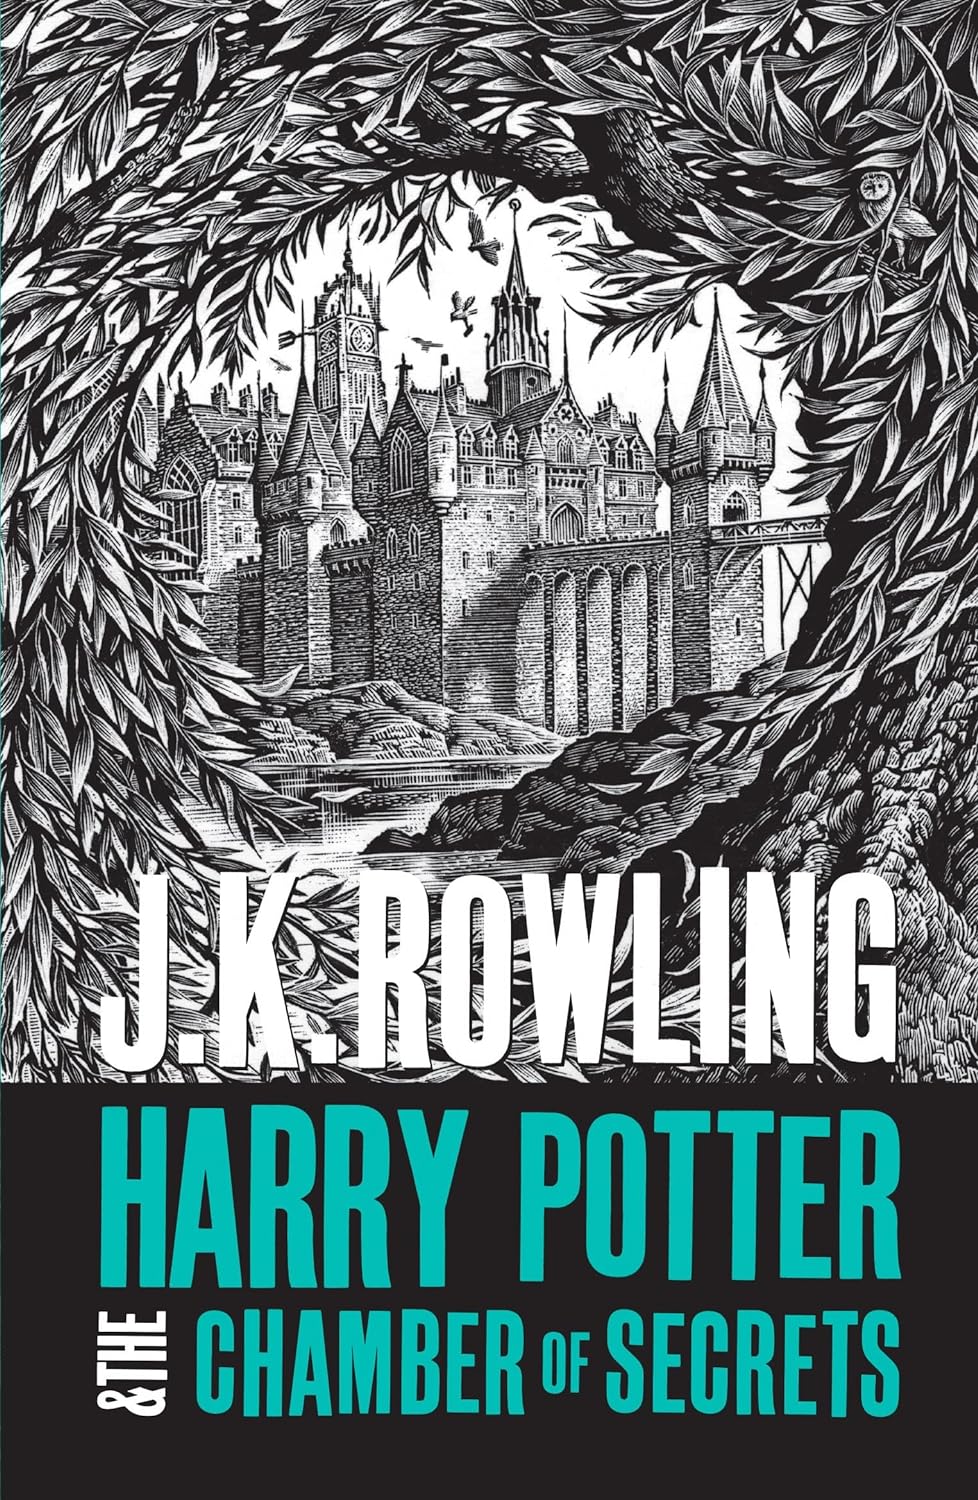 Sách Ngoại Văn - Harry Potter and the Chamber of Secrets [Paperback] by J. K. Rowling (Author)